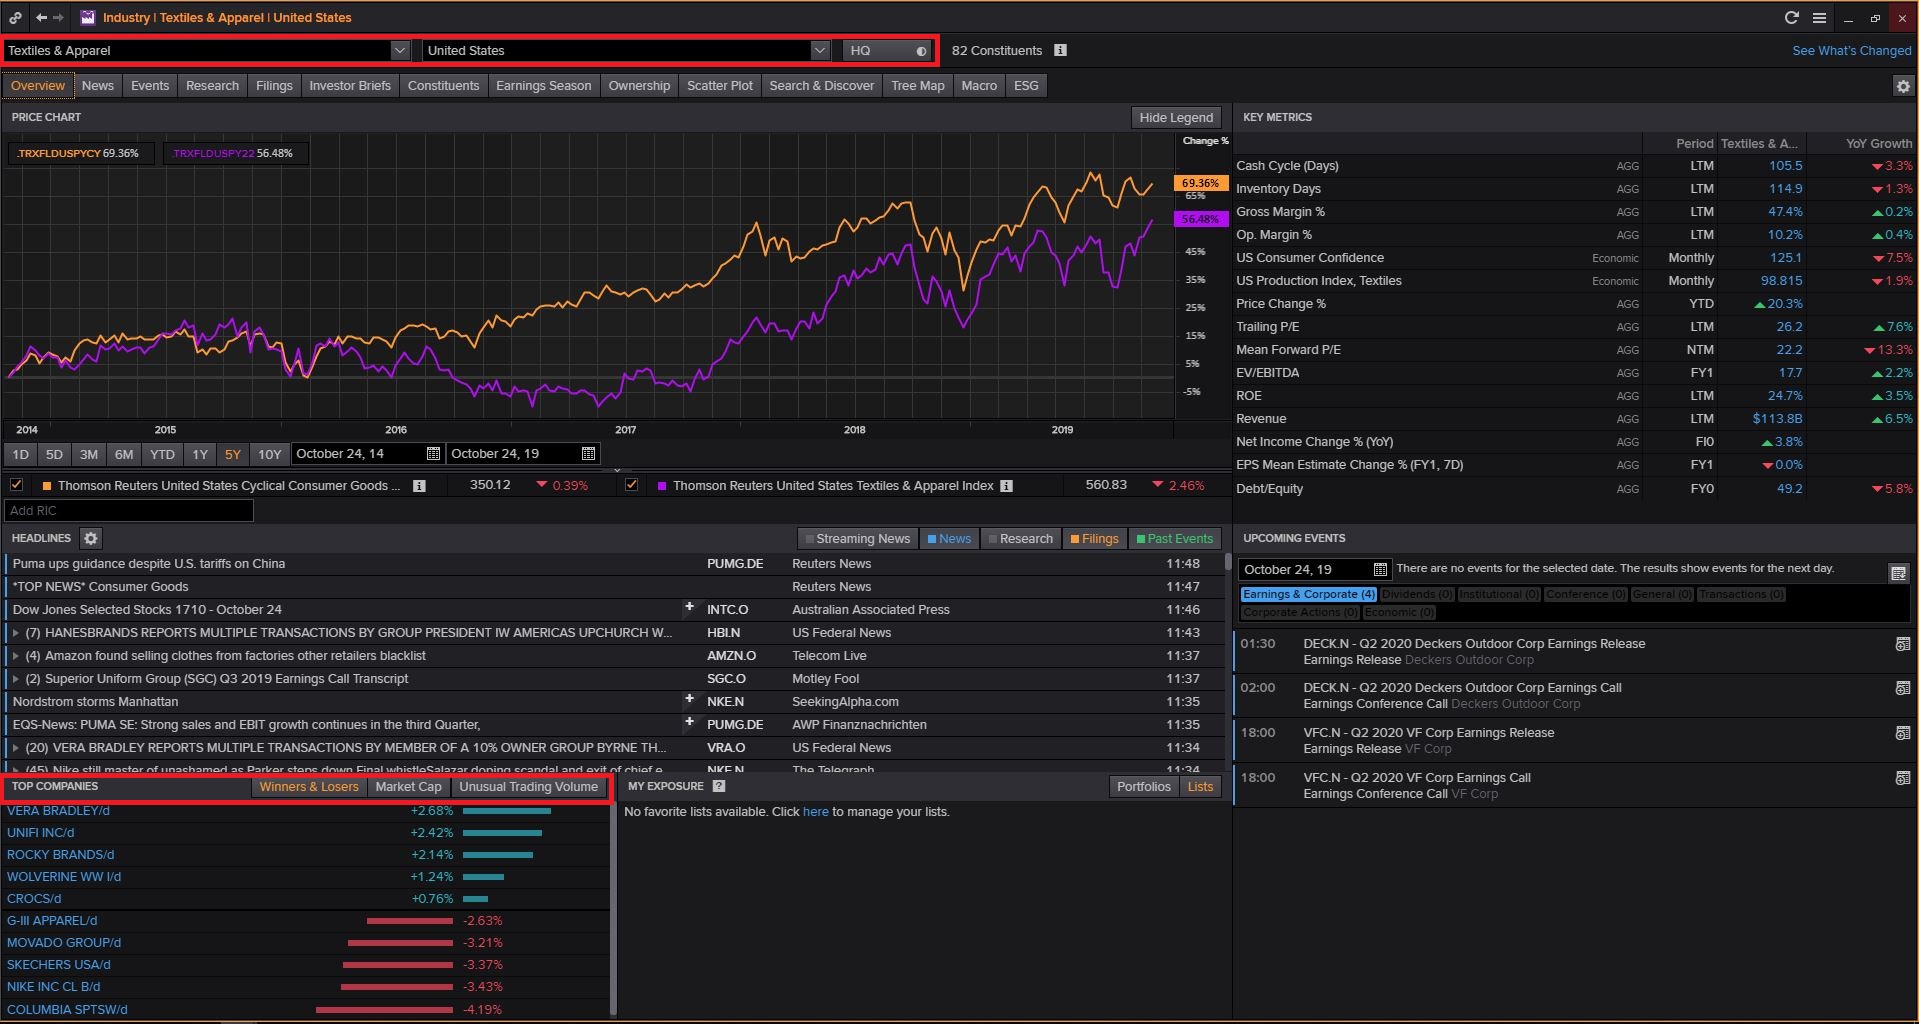 Login to Thomson Reuters Eikon (Available Only in Library) then Type INDUS and Search and Select Consumer Cyclicals and Click on Cyclical Consumer Products and Click on Textiles & Apparel and Select Country and Click on Top Companies